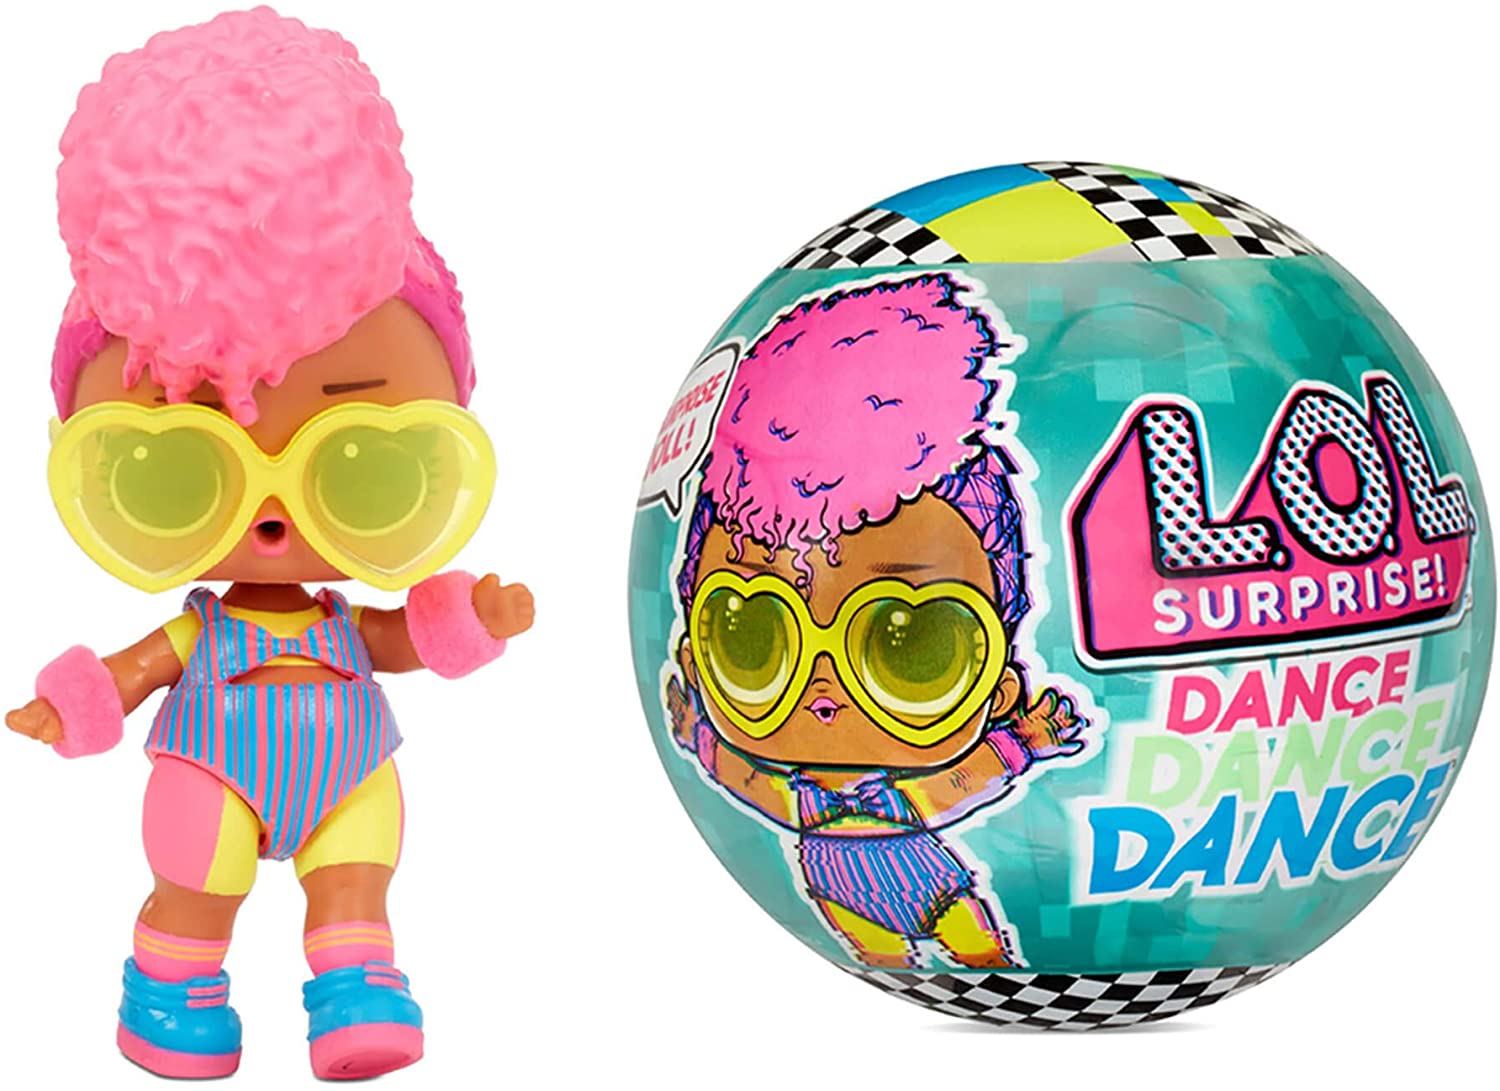 LOL OMG Dance dolls are up for preorder in Europe and UK! - YouLoveIt.com